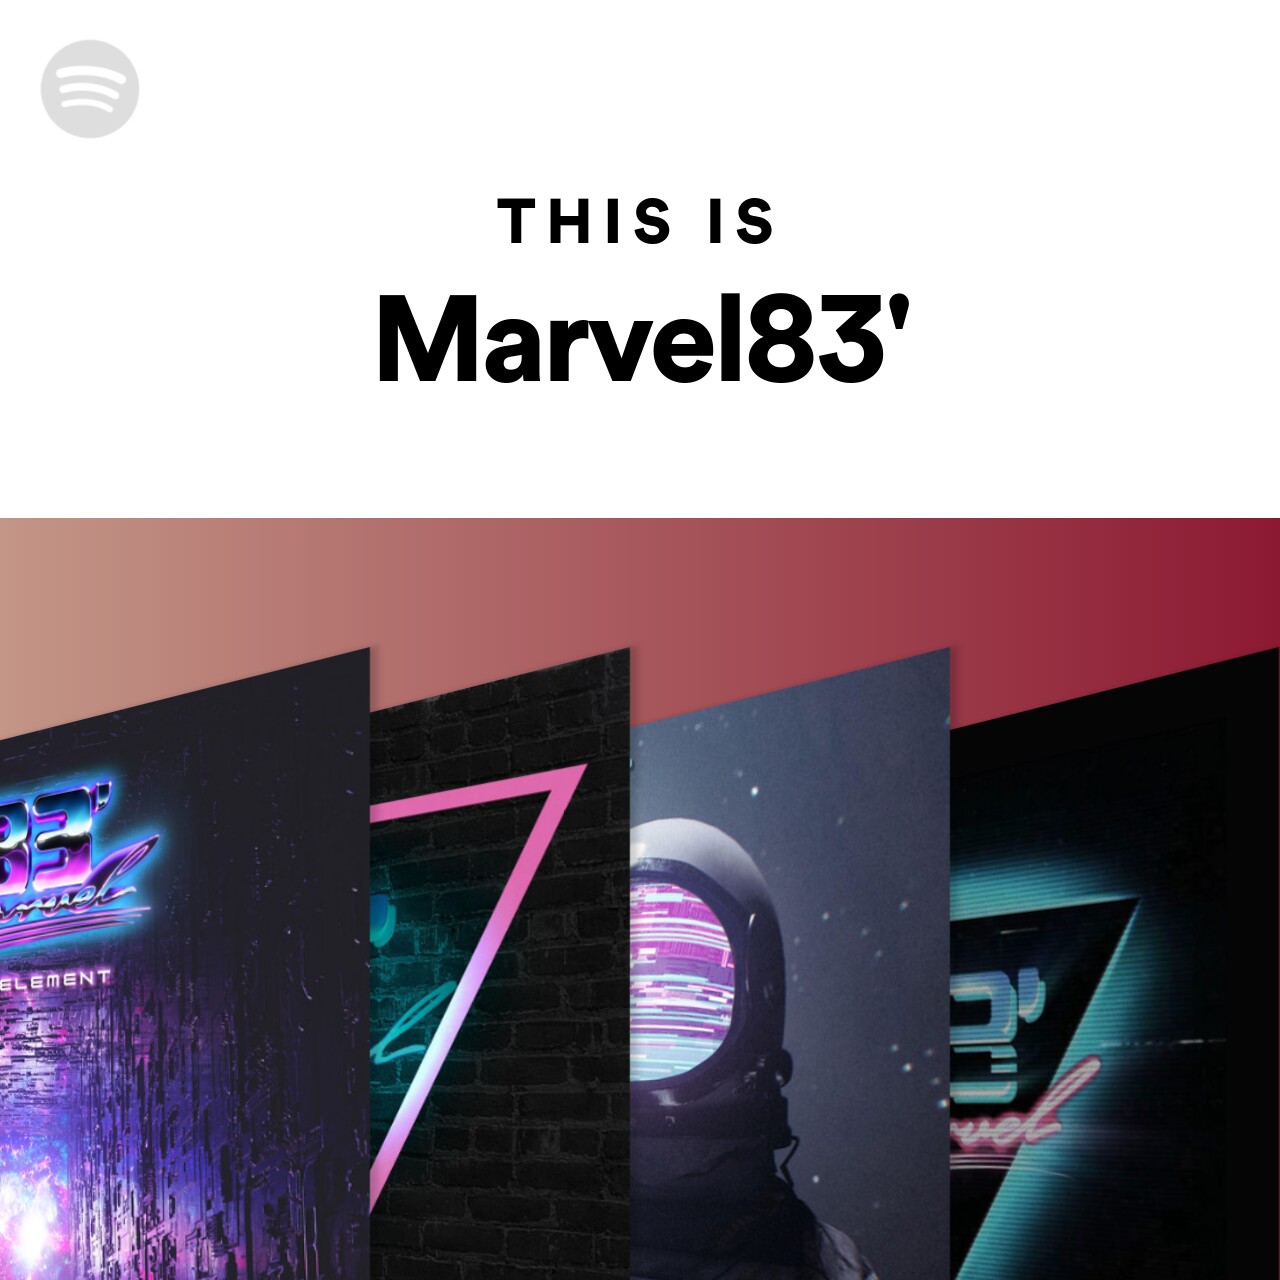 This Is Marvel83'